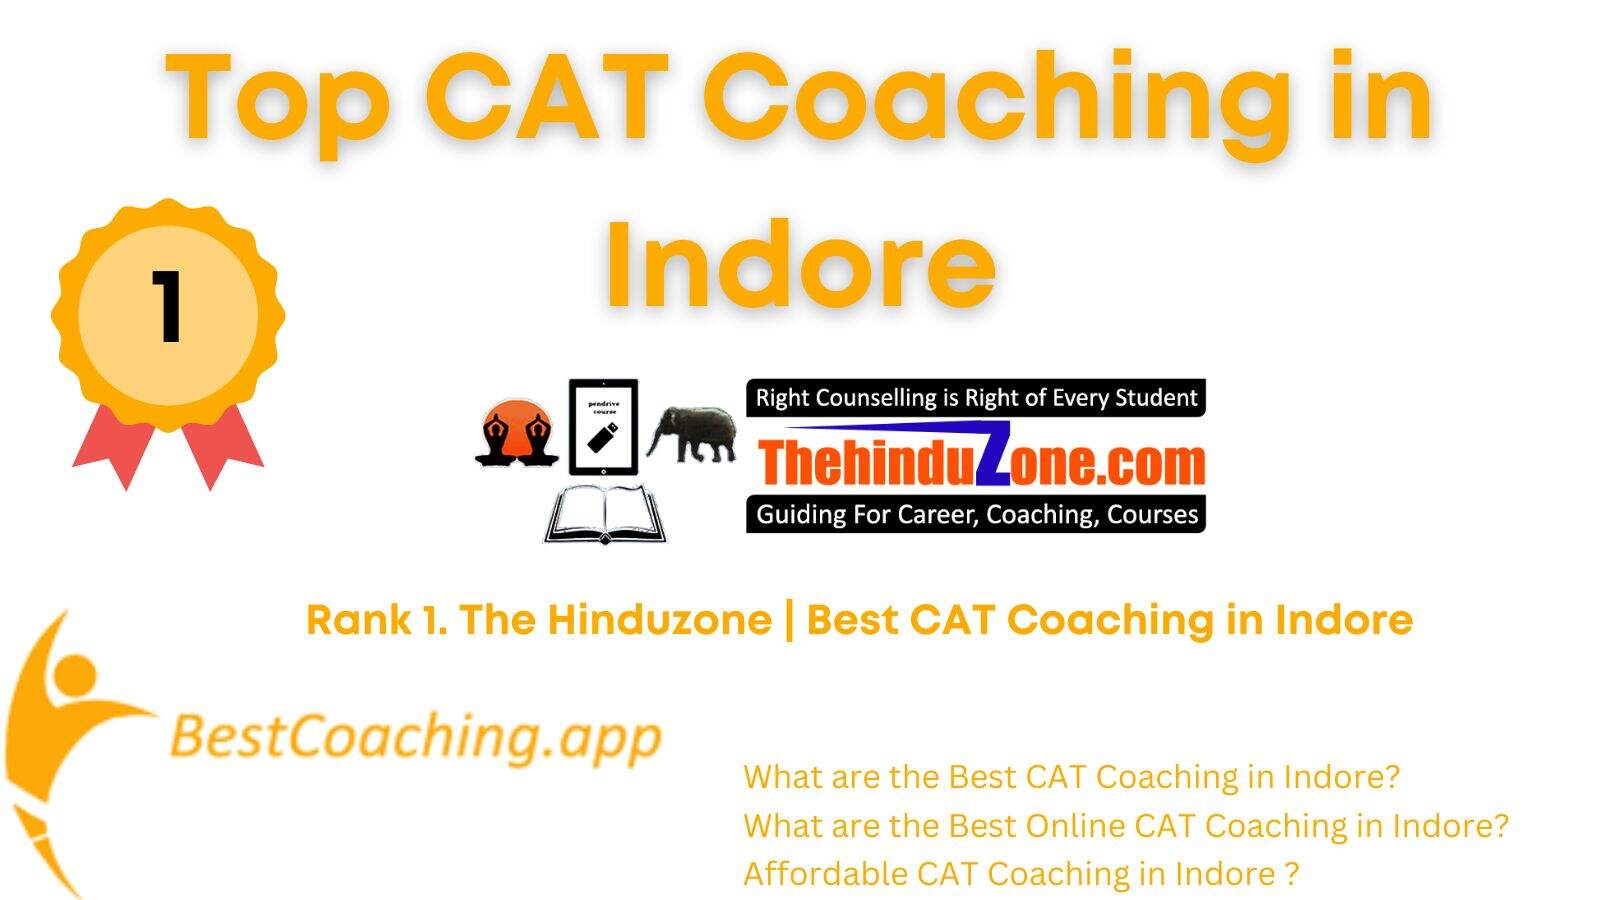 Rank 1. The Hinduzone | Best CAT Coaching in Indore